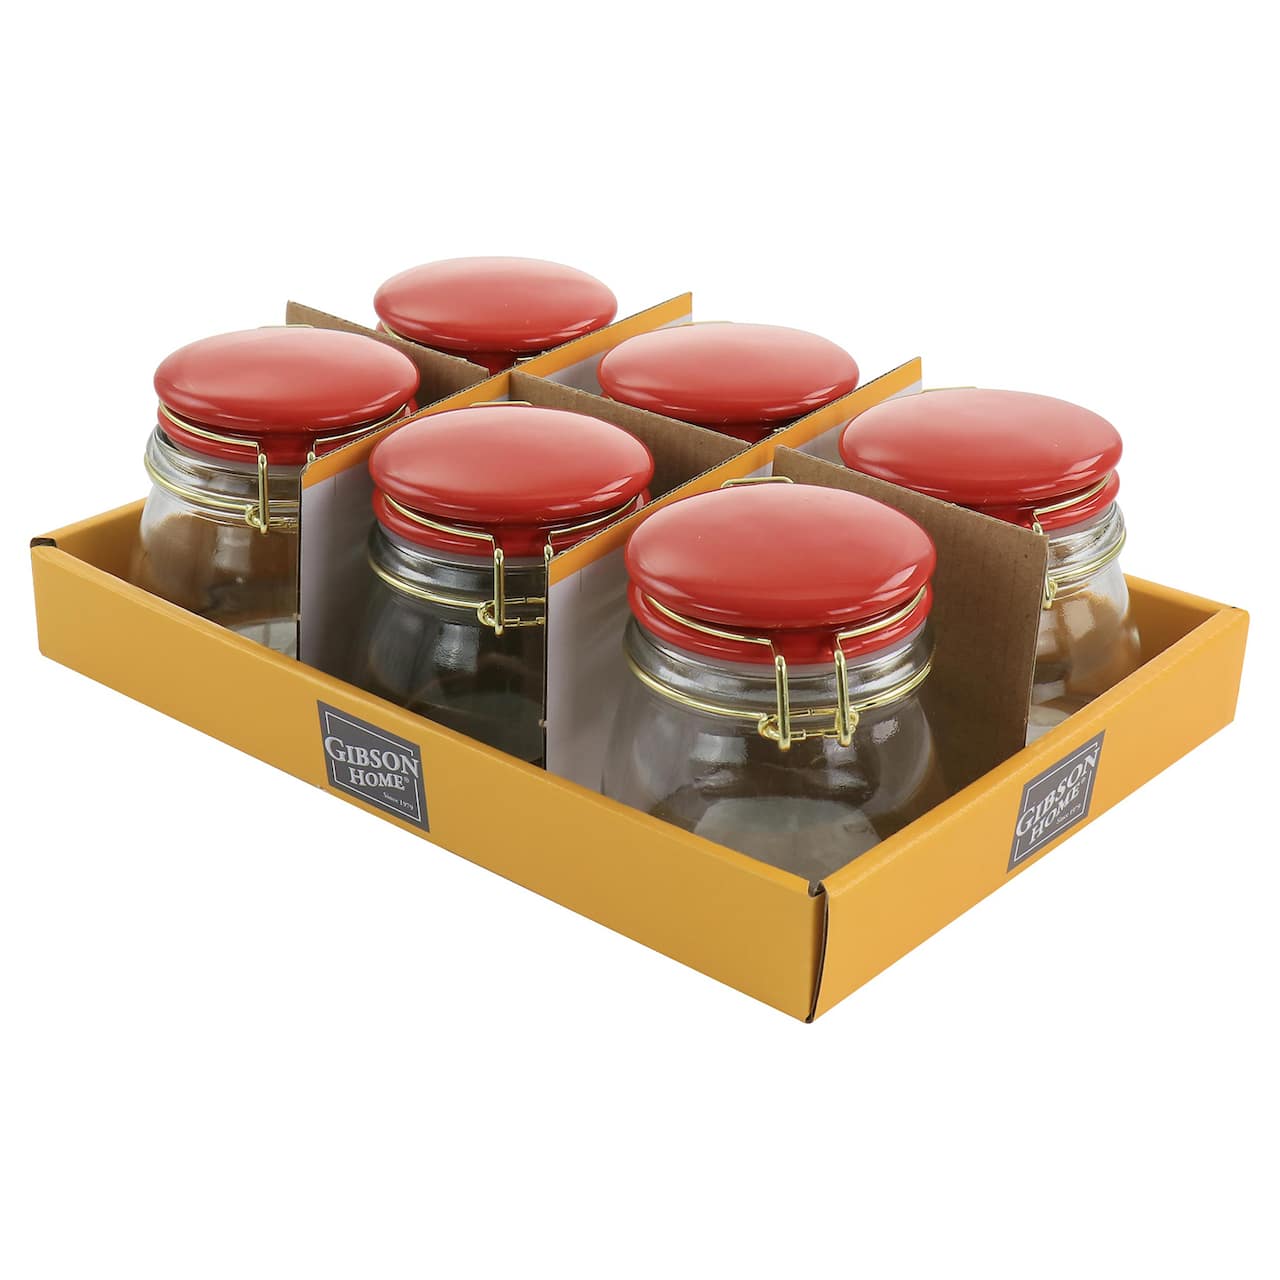 Gibson Home® 5oz. Clear Glass Jars with Red Lids, 6ct.